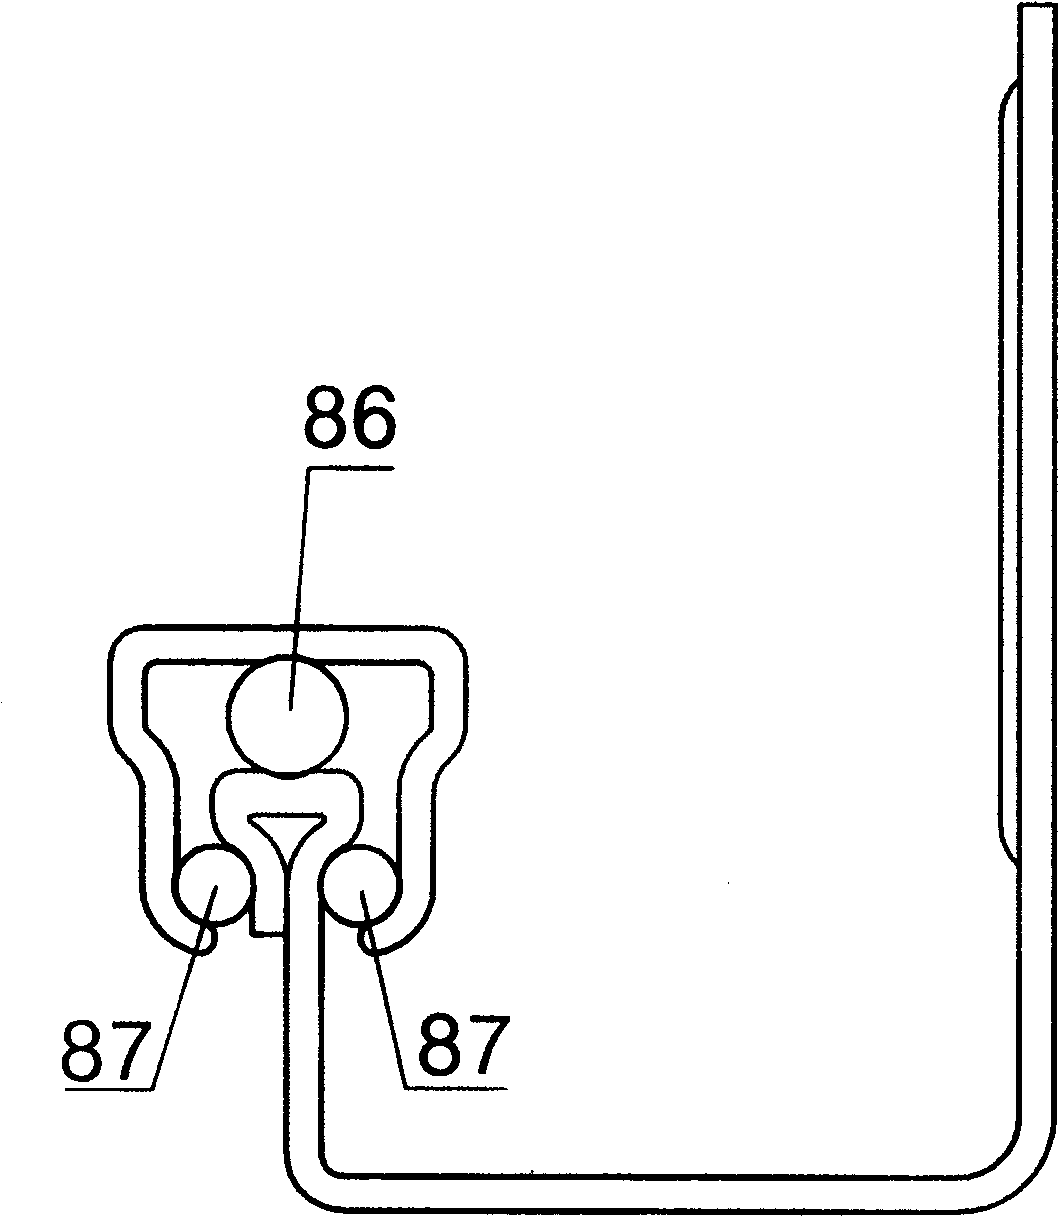 Drawer guide rail structure